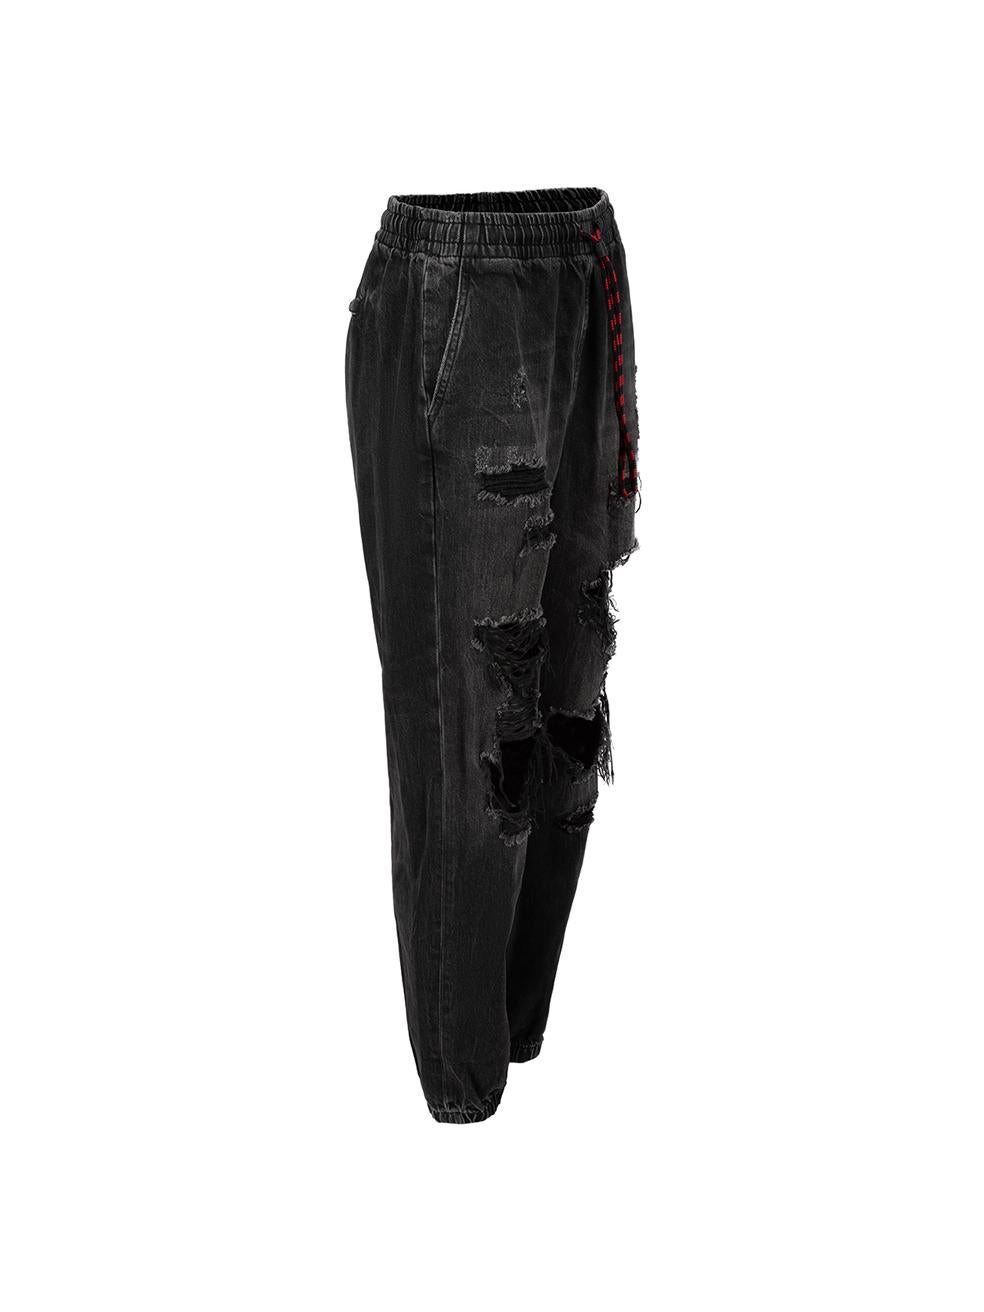 CONDITION is Very good. Hardly any visible wear to trousers is evident on this used Alexander Wang designer resale item. Please note that this item is deliberately distressed.



Details


Black

Denim

Jeans

Distressed

Boyfriend fit

Elasticated